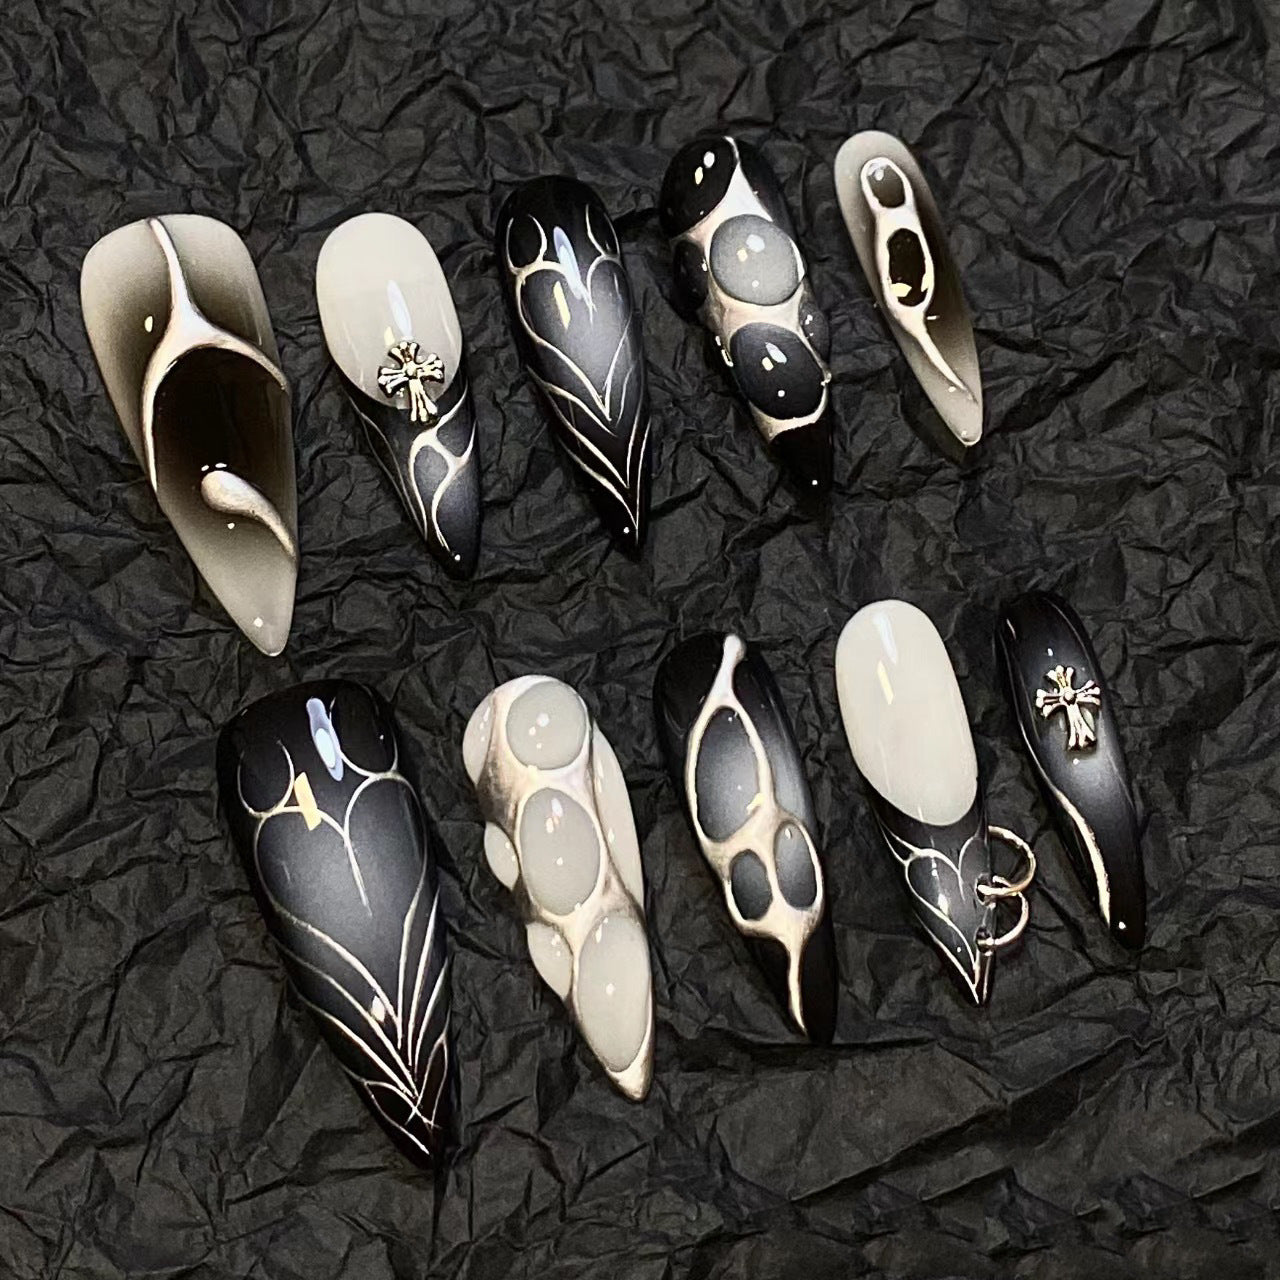 DARK MAGIC-TEN PIECES OF HANDCRAFTED PRESS ON NAIL